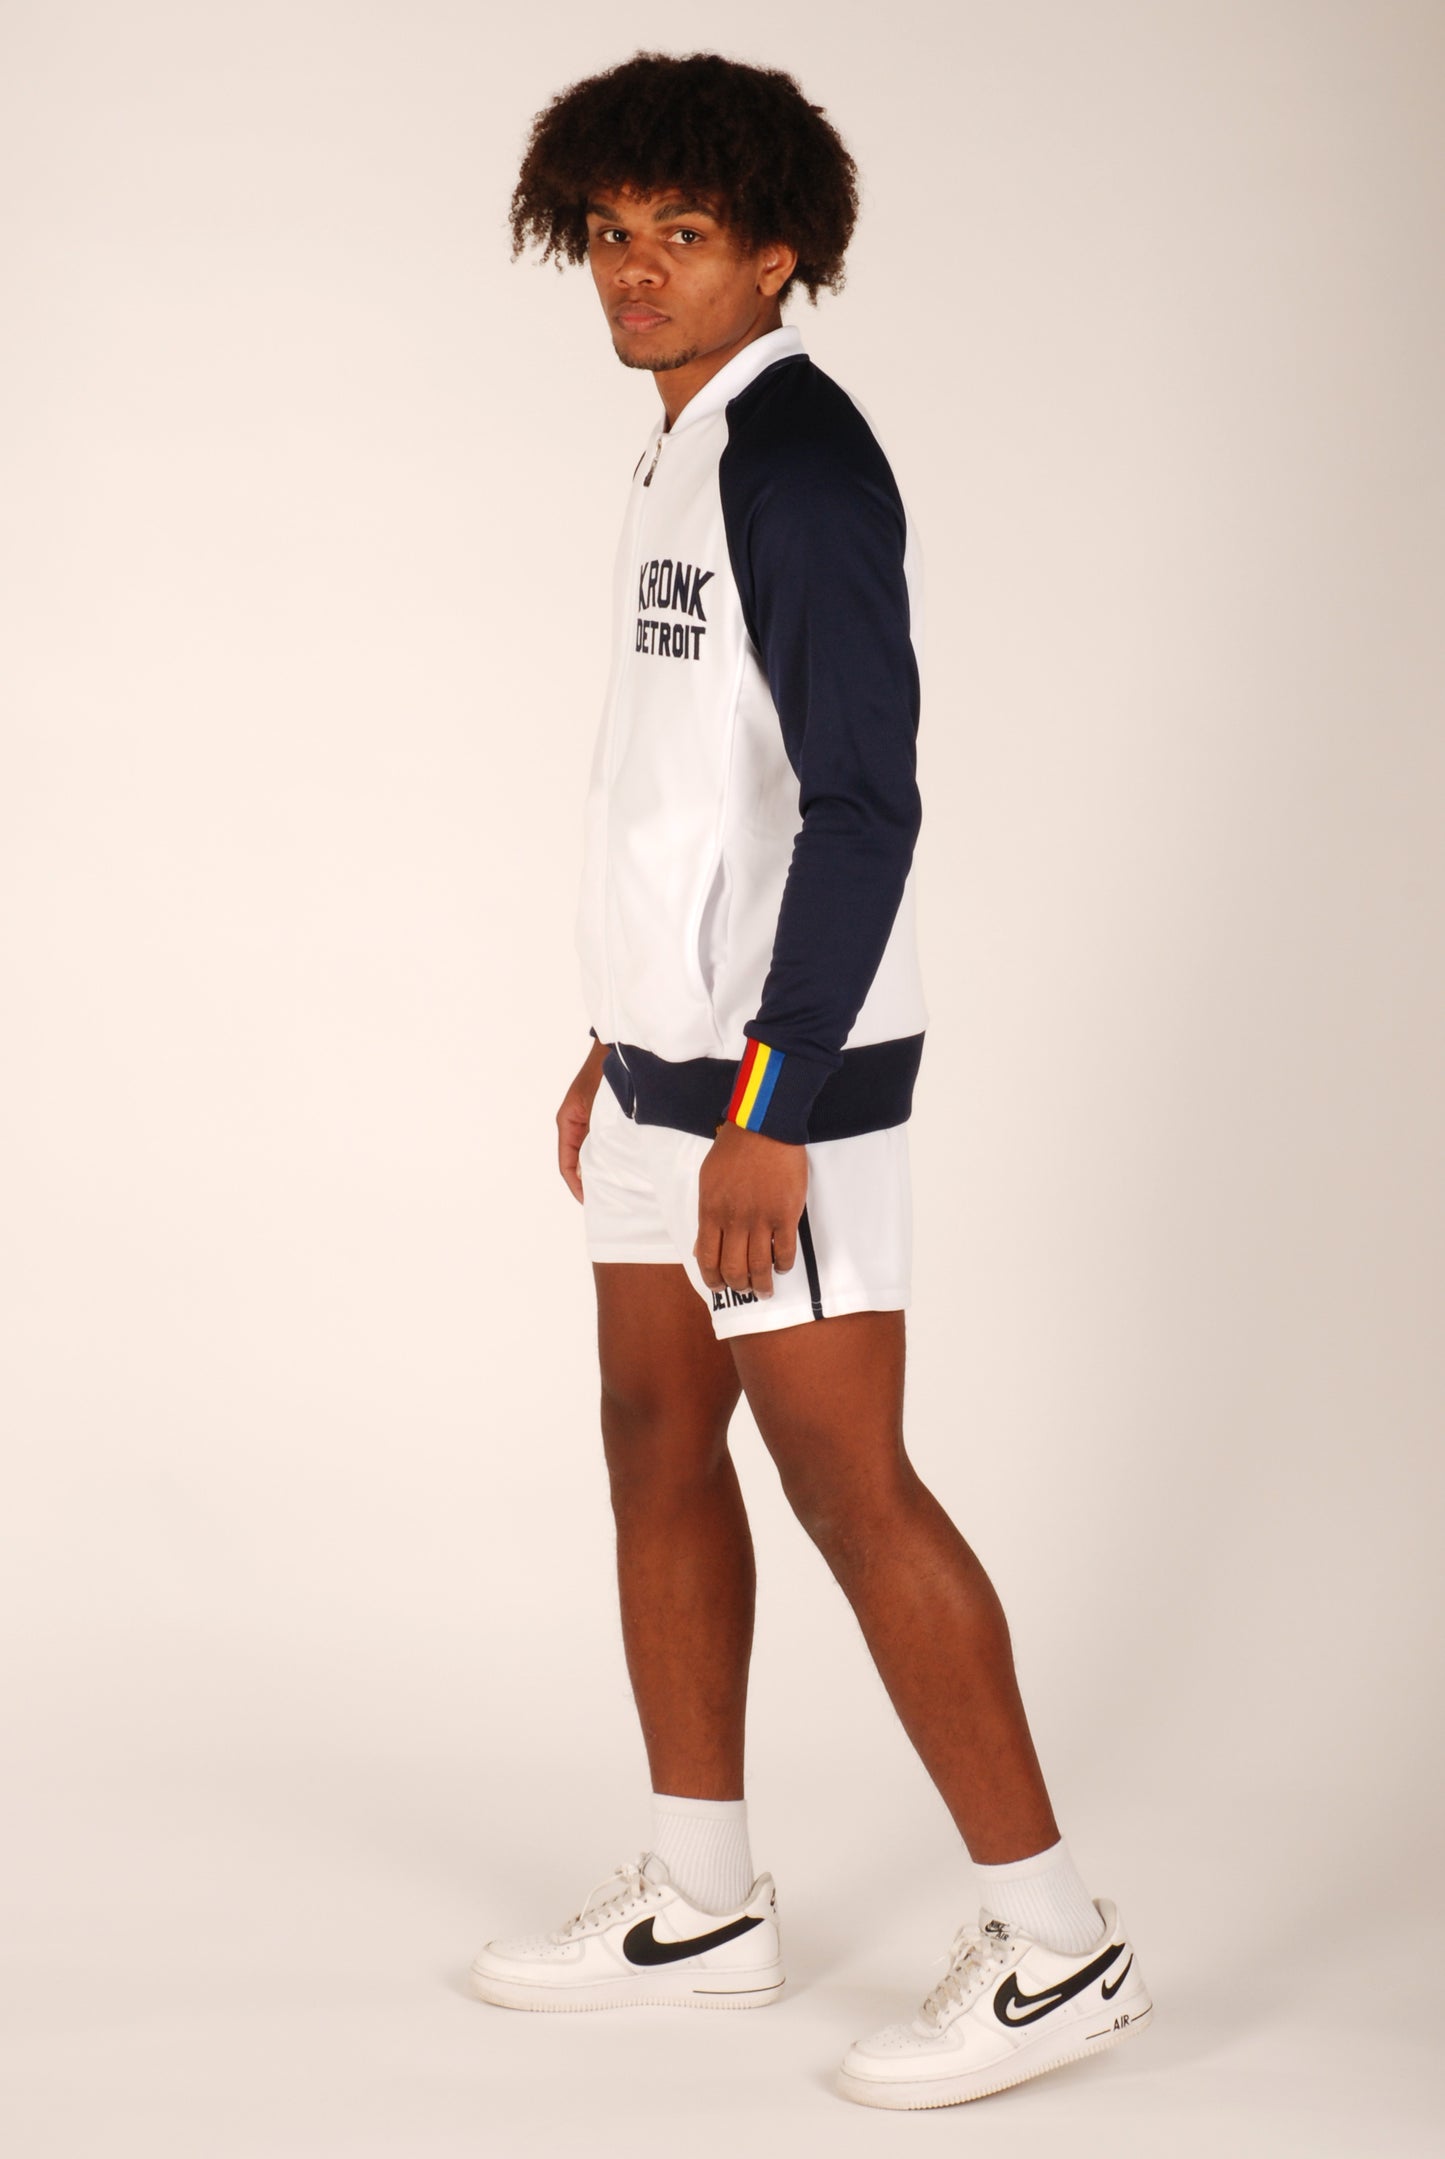 KRONK Iconic Detroit Zip Track Top Navy and White